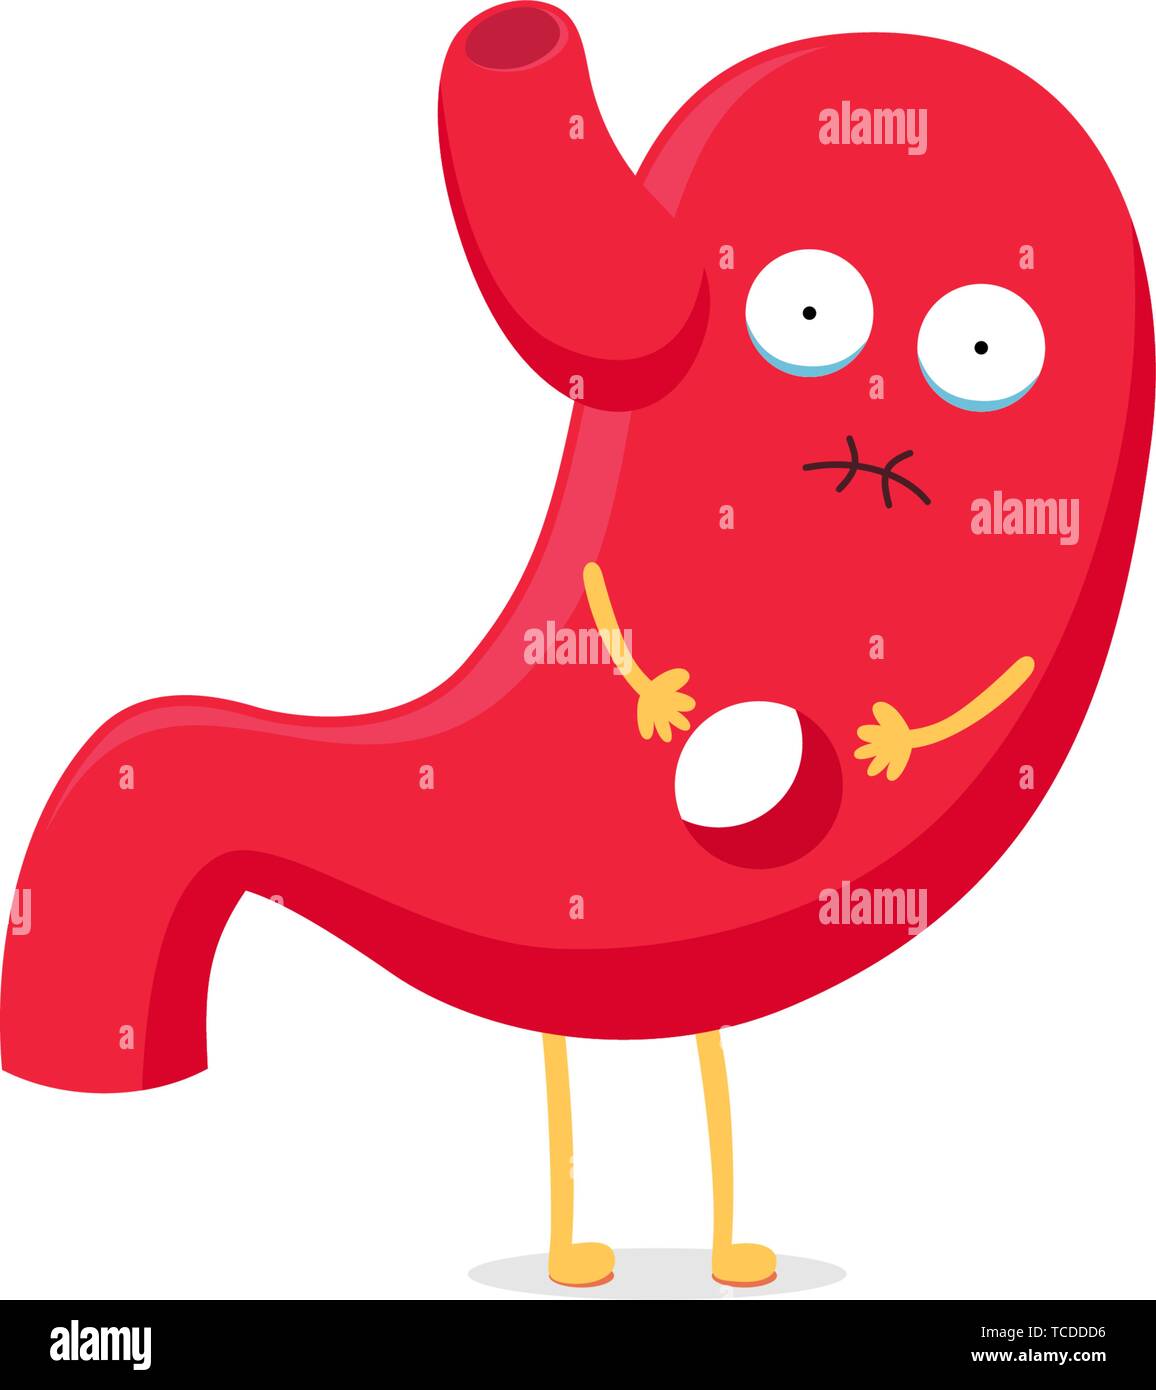 Cartoon stomach character unhealthy sick perforated ulcer emoji emotion. Vector organ digestive system gastritis and abdominal pain. Flat illustration Stock Vector